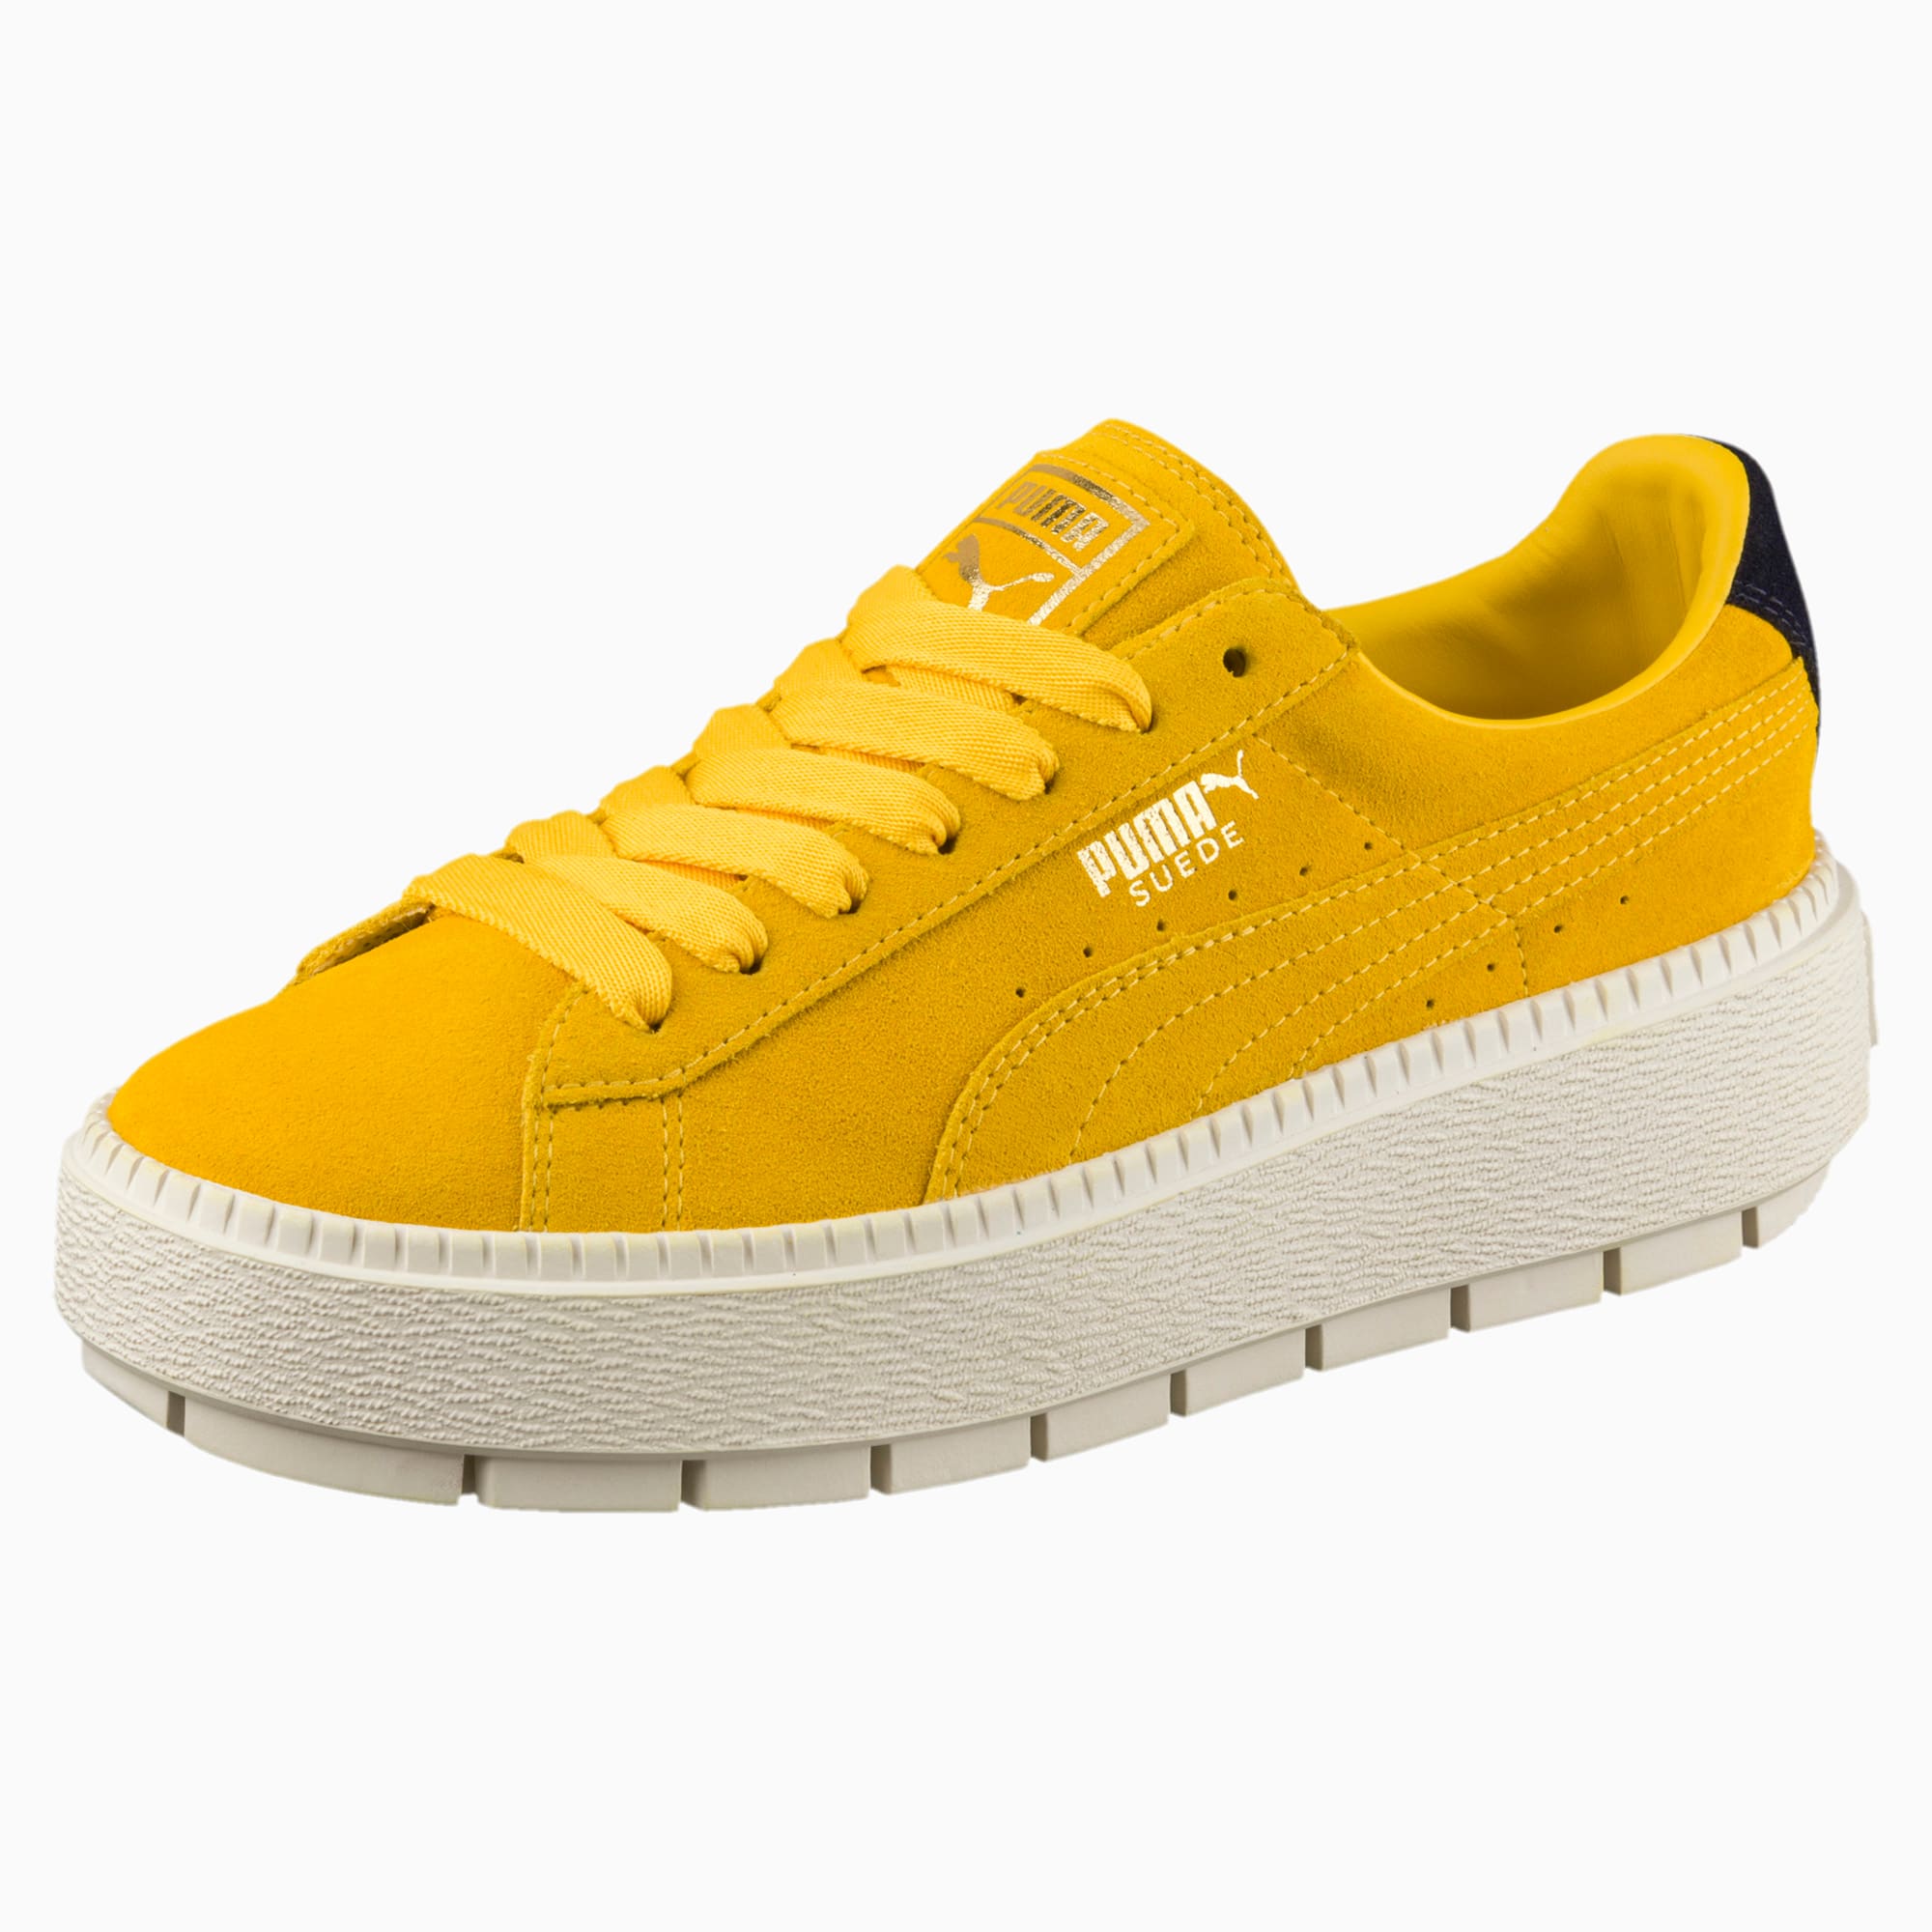 puma blue & yellow trace suede platform trainers